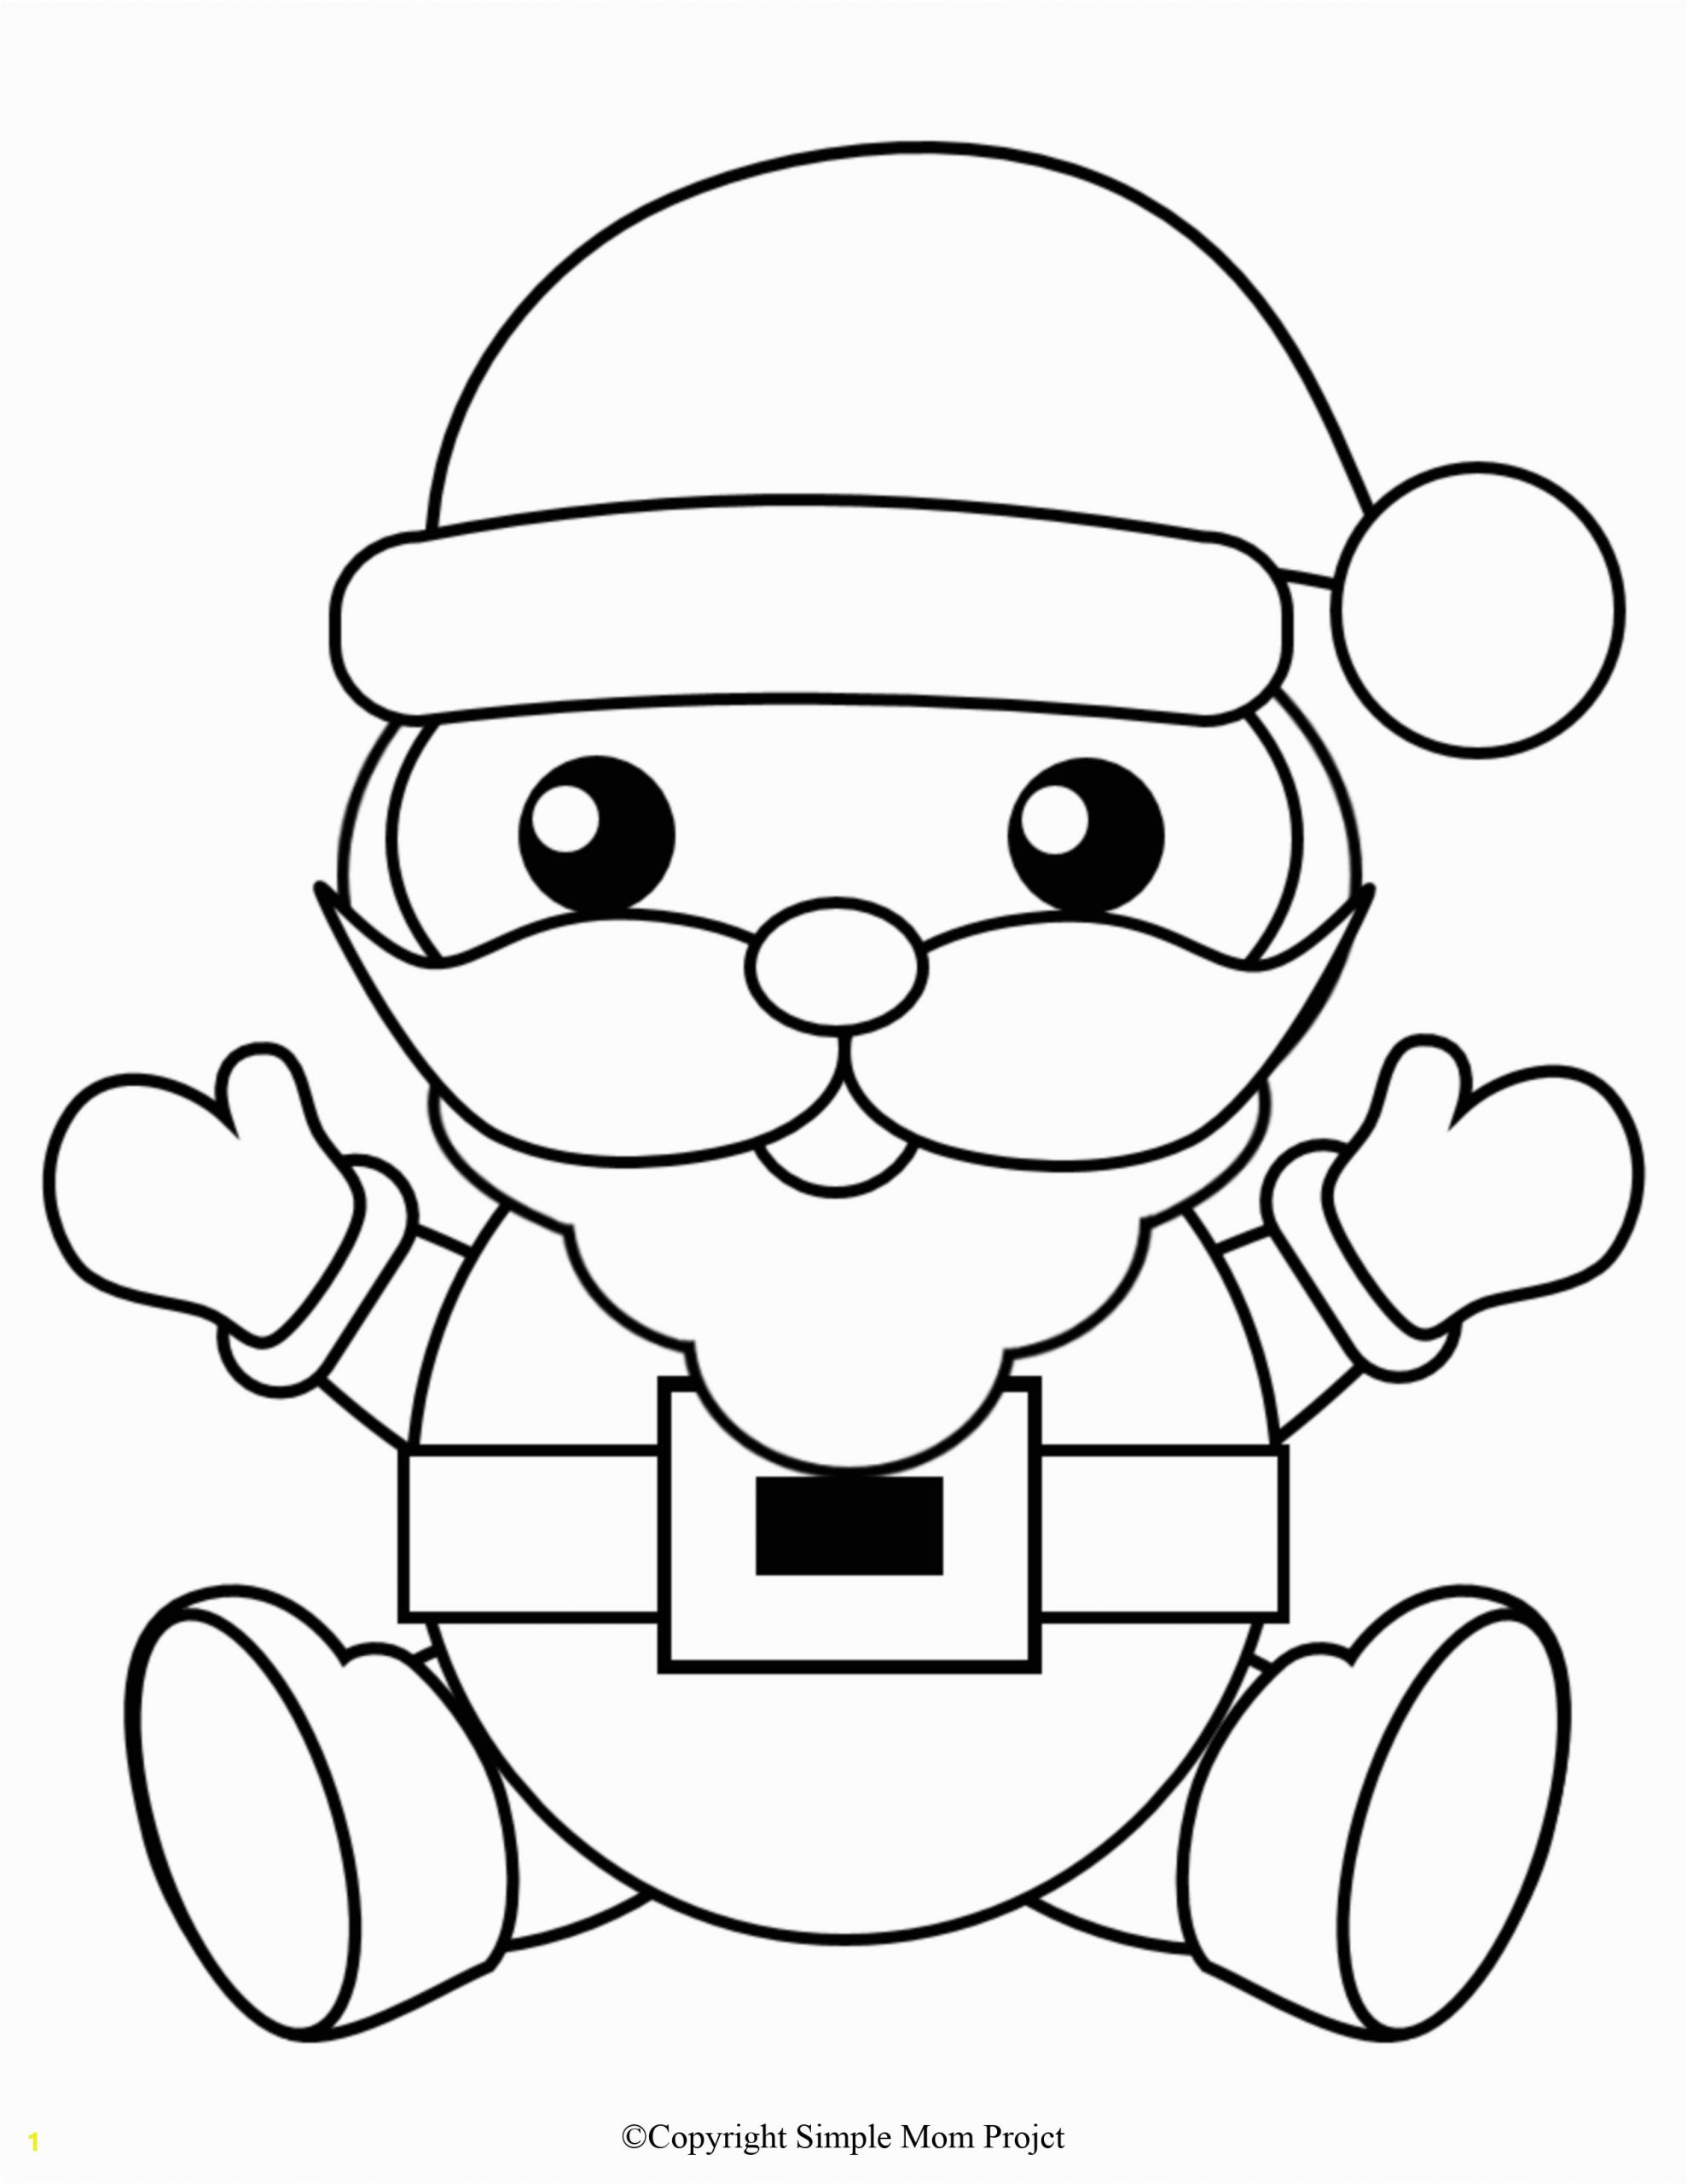 Santa Claus Coloring Pages Printable Free Printable Christmas Coloring Sheets for Kids and Adults